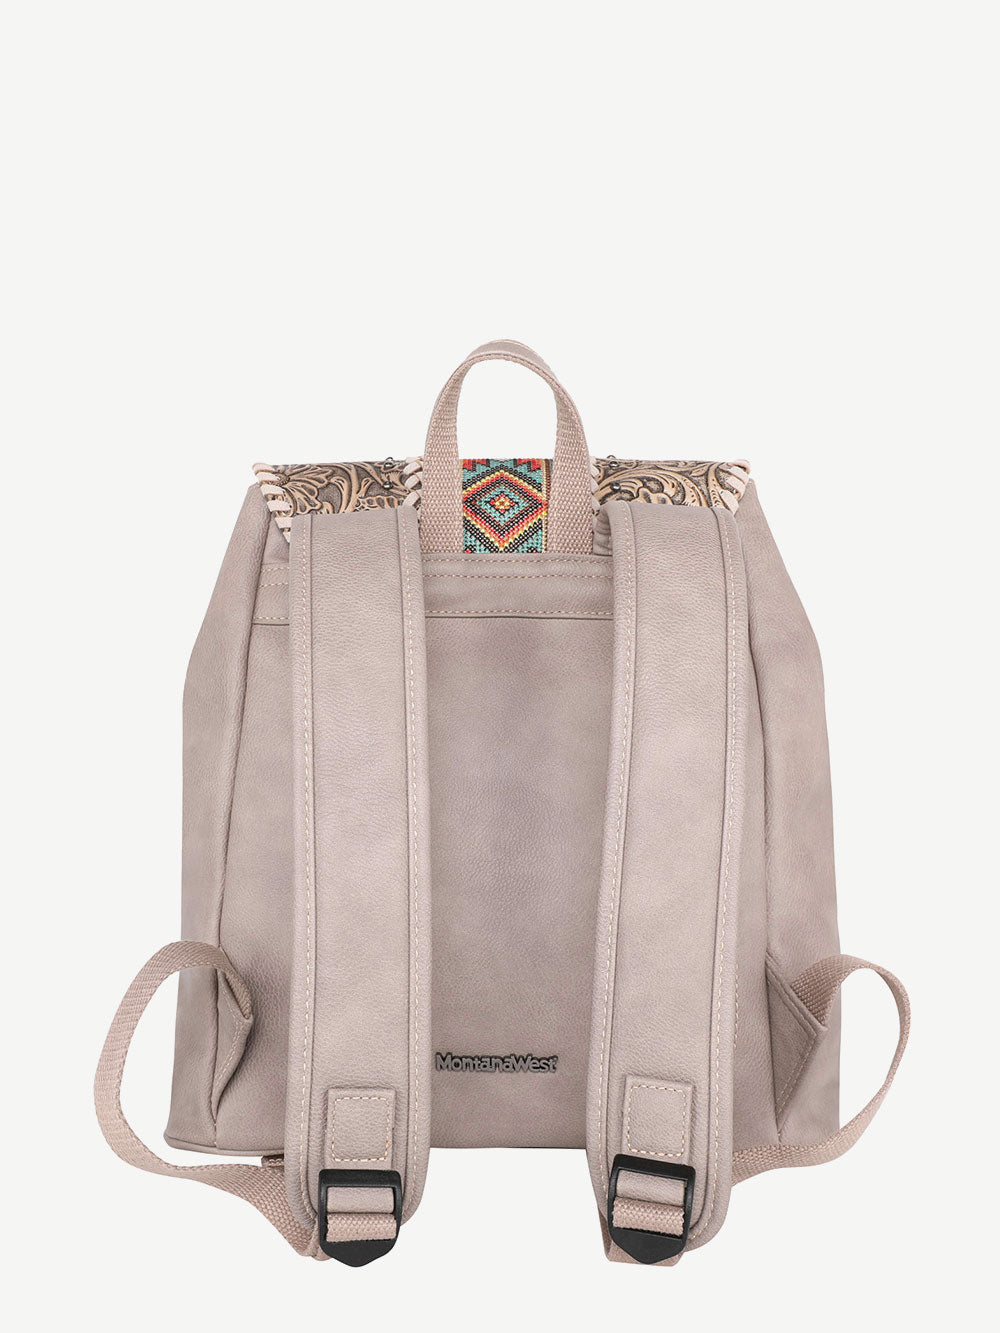 Floral Embroidered Backpack For Women